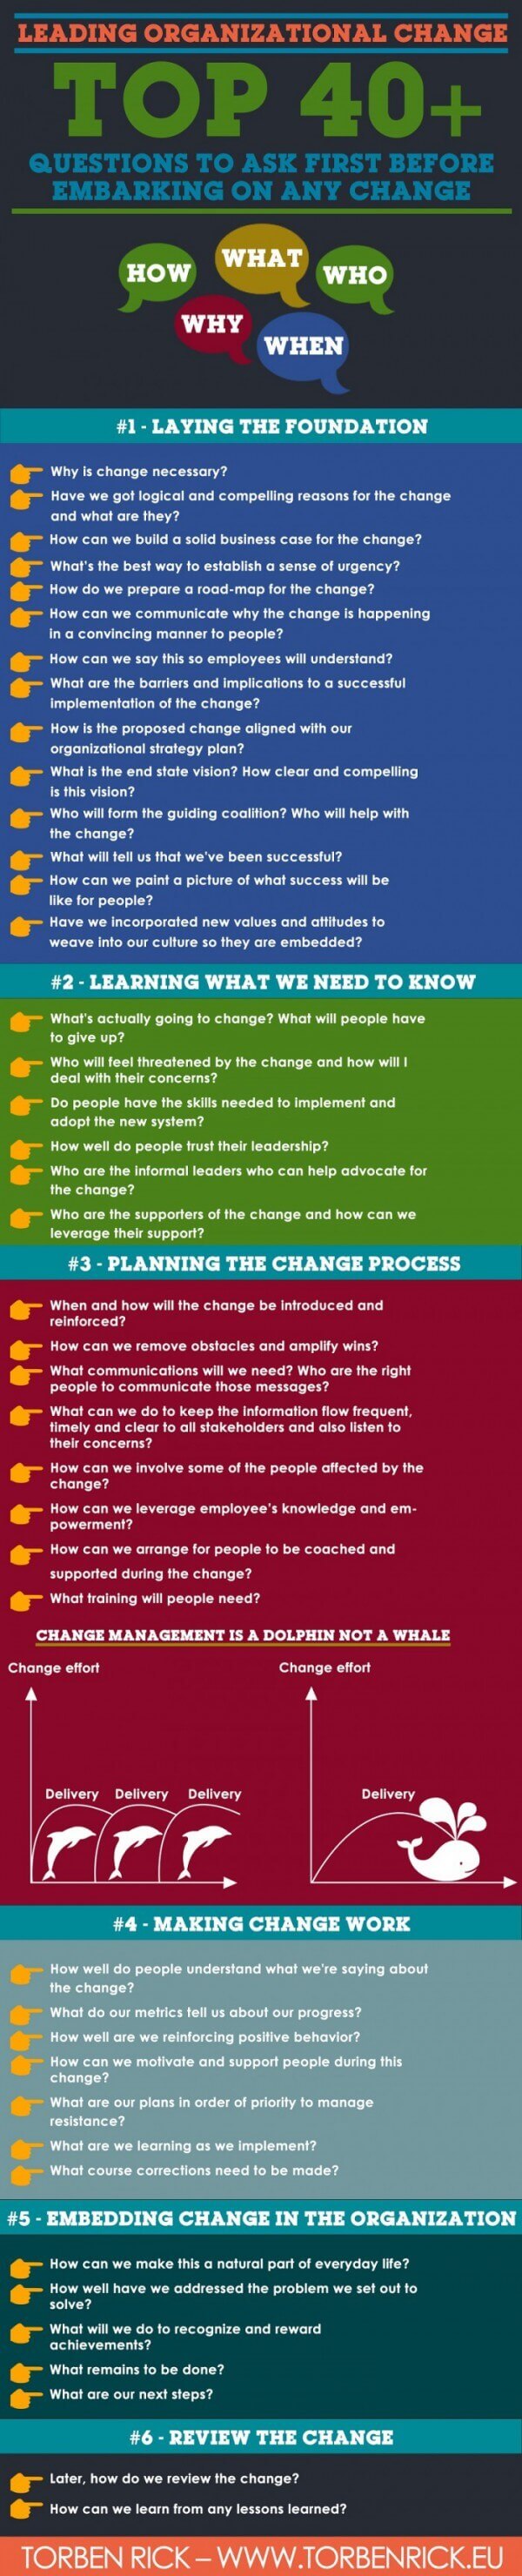 Infographic-Top-40-questions-to-ask-before-embarking-on-any-change-management